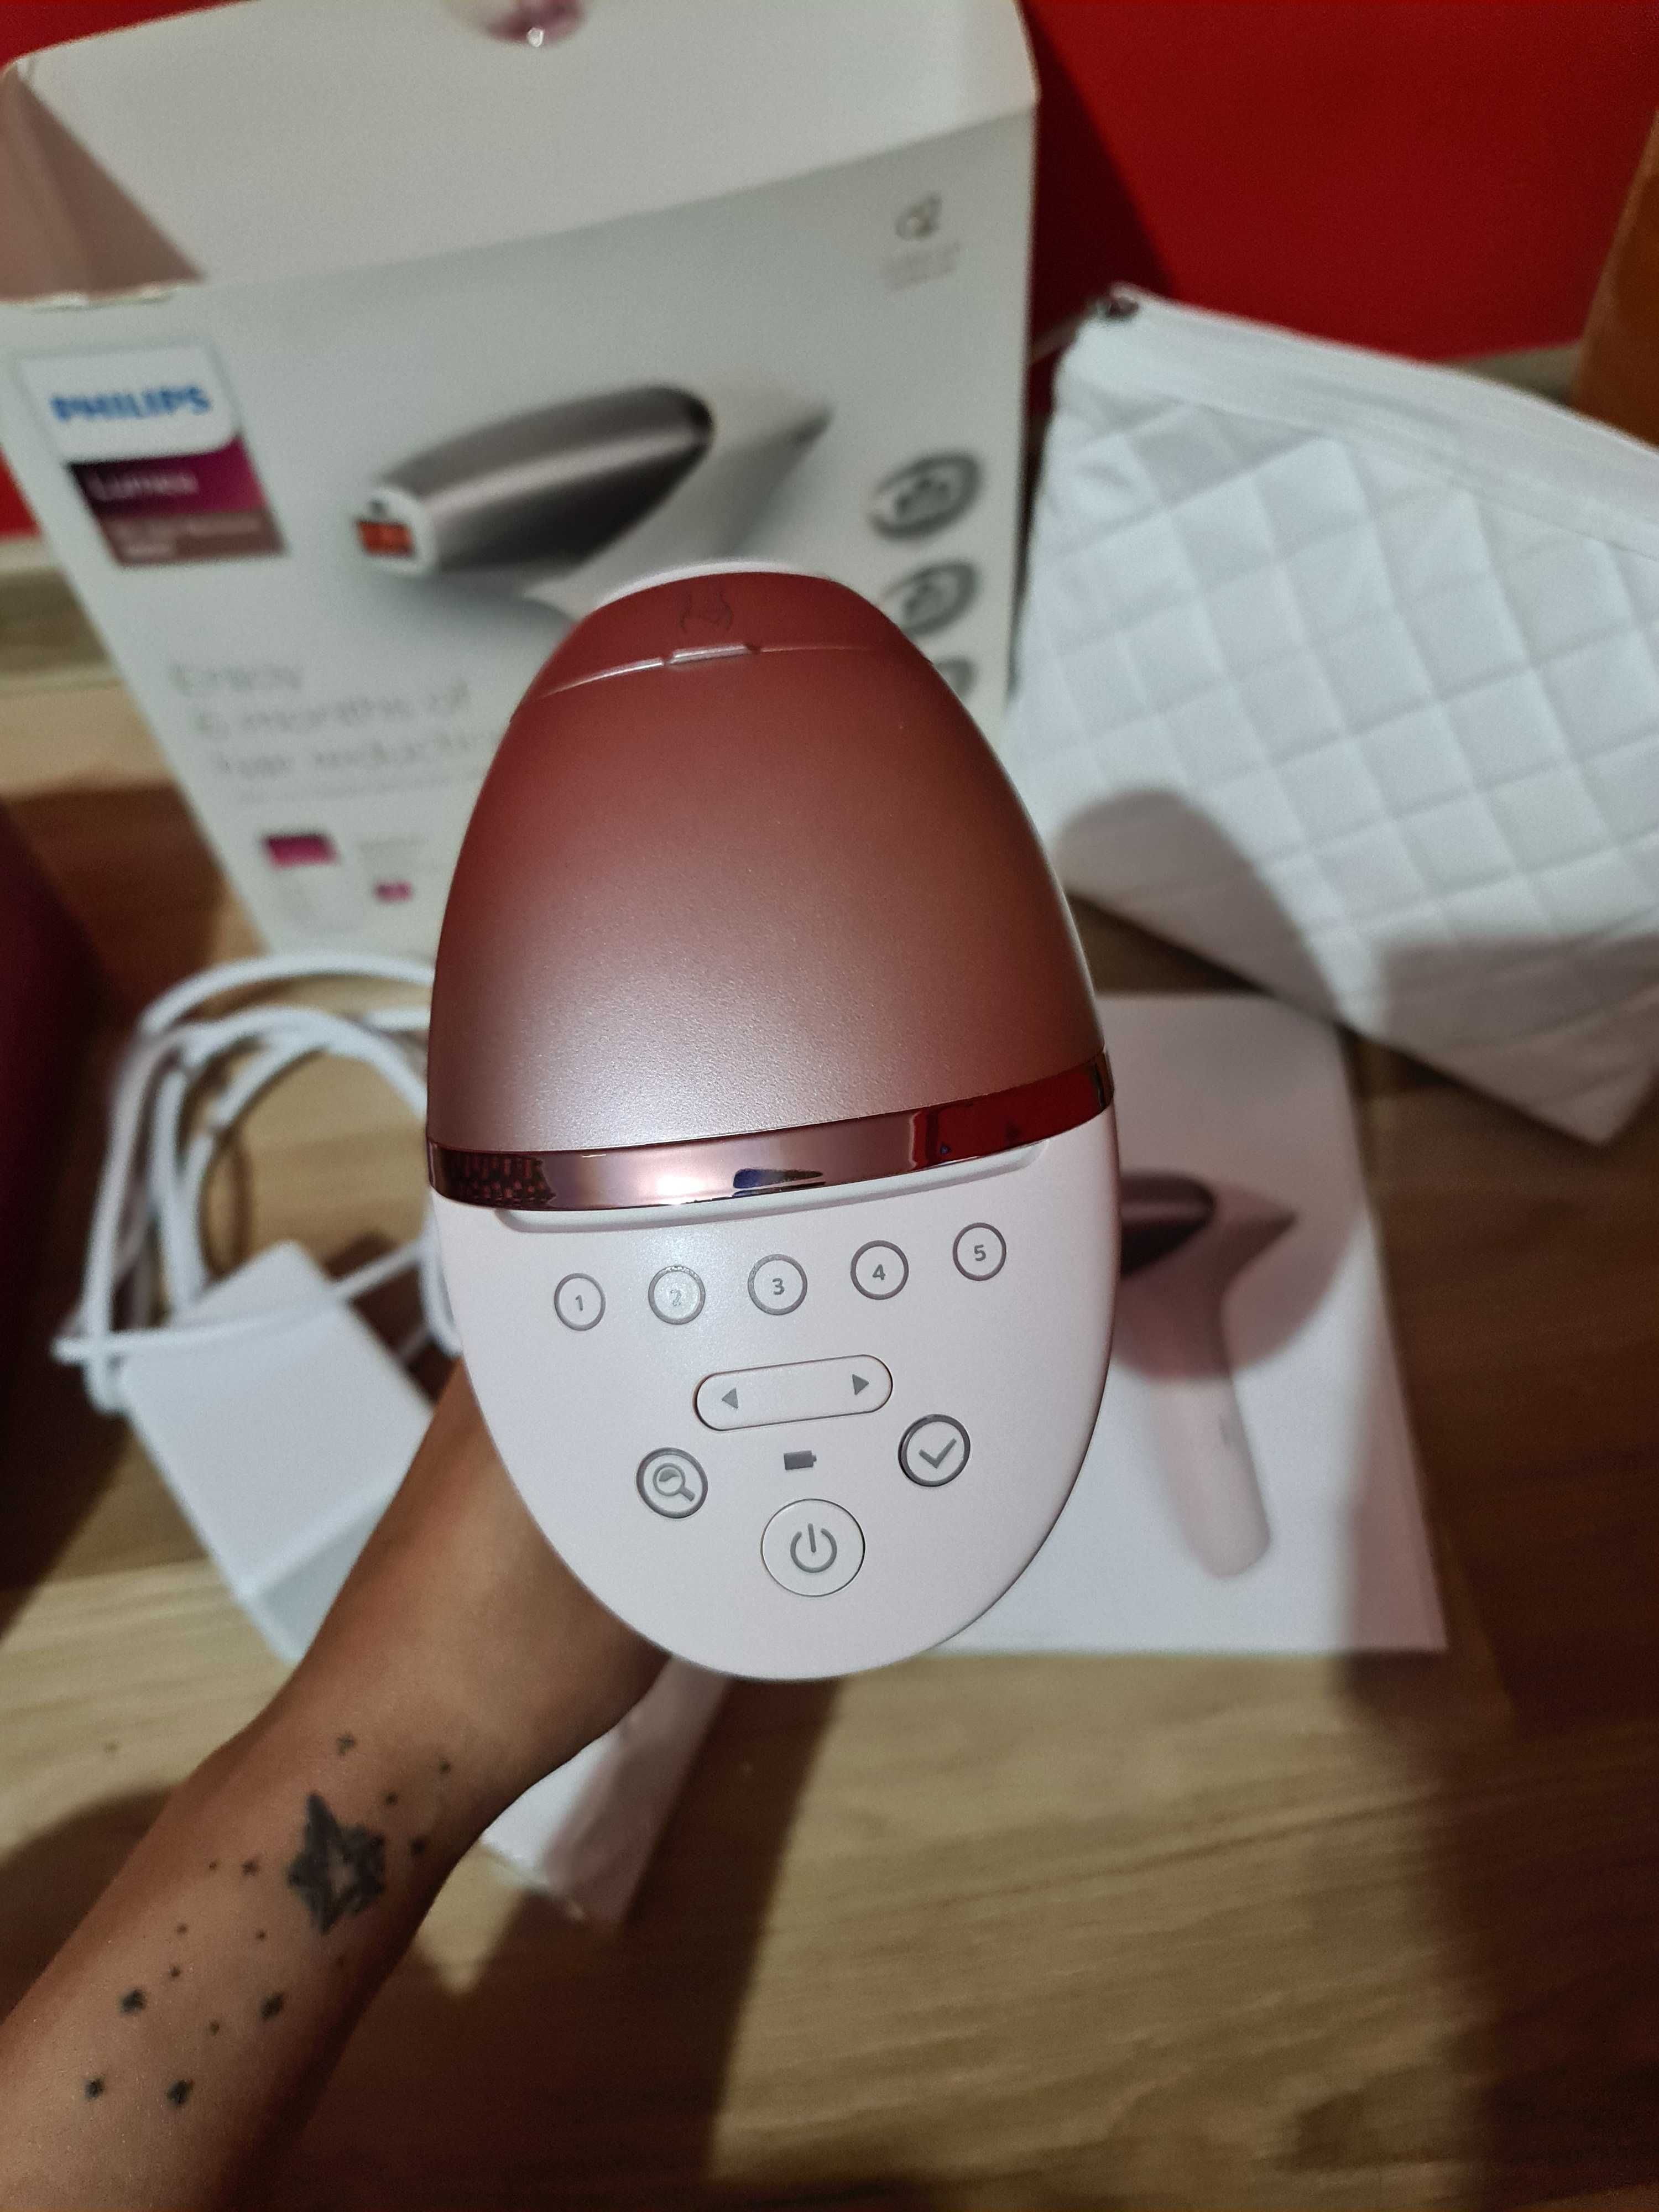 Philips lumea hair removal